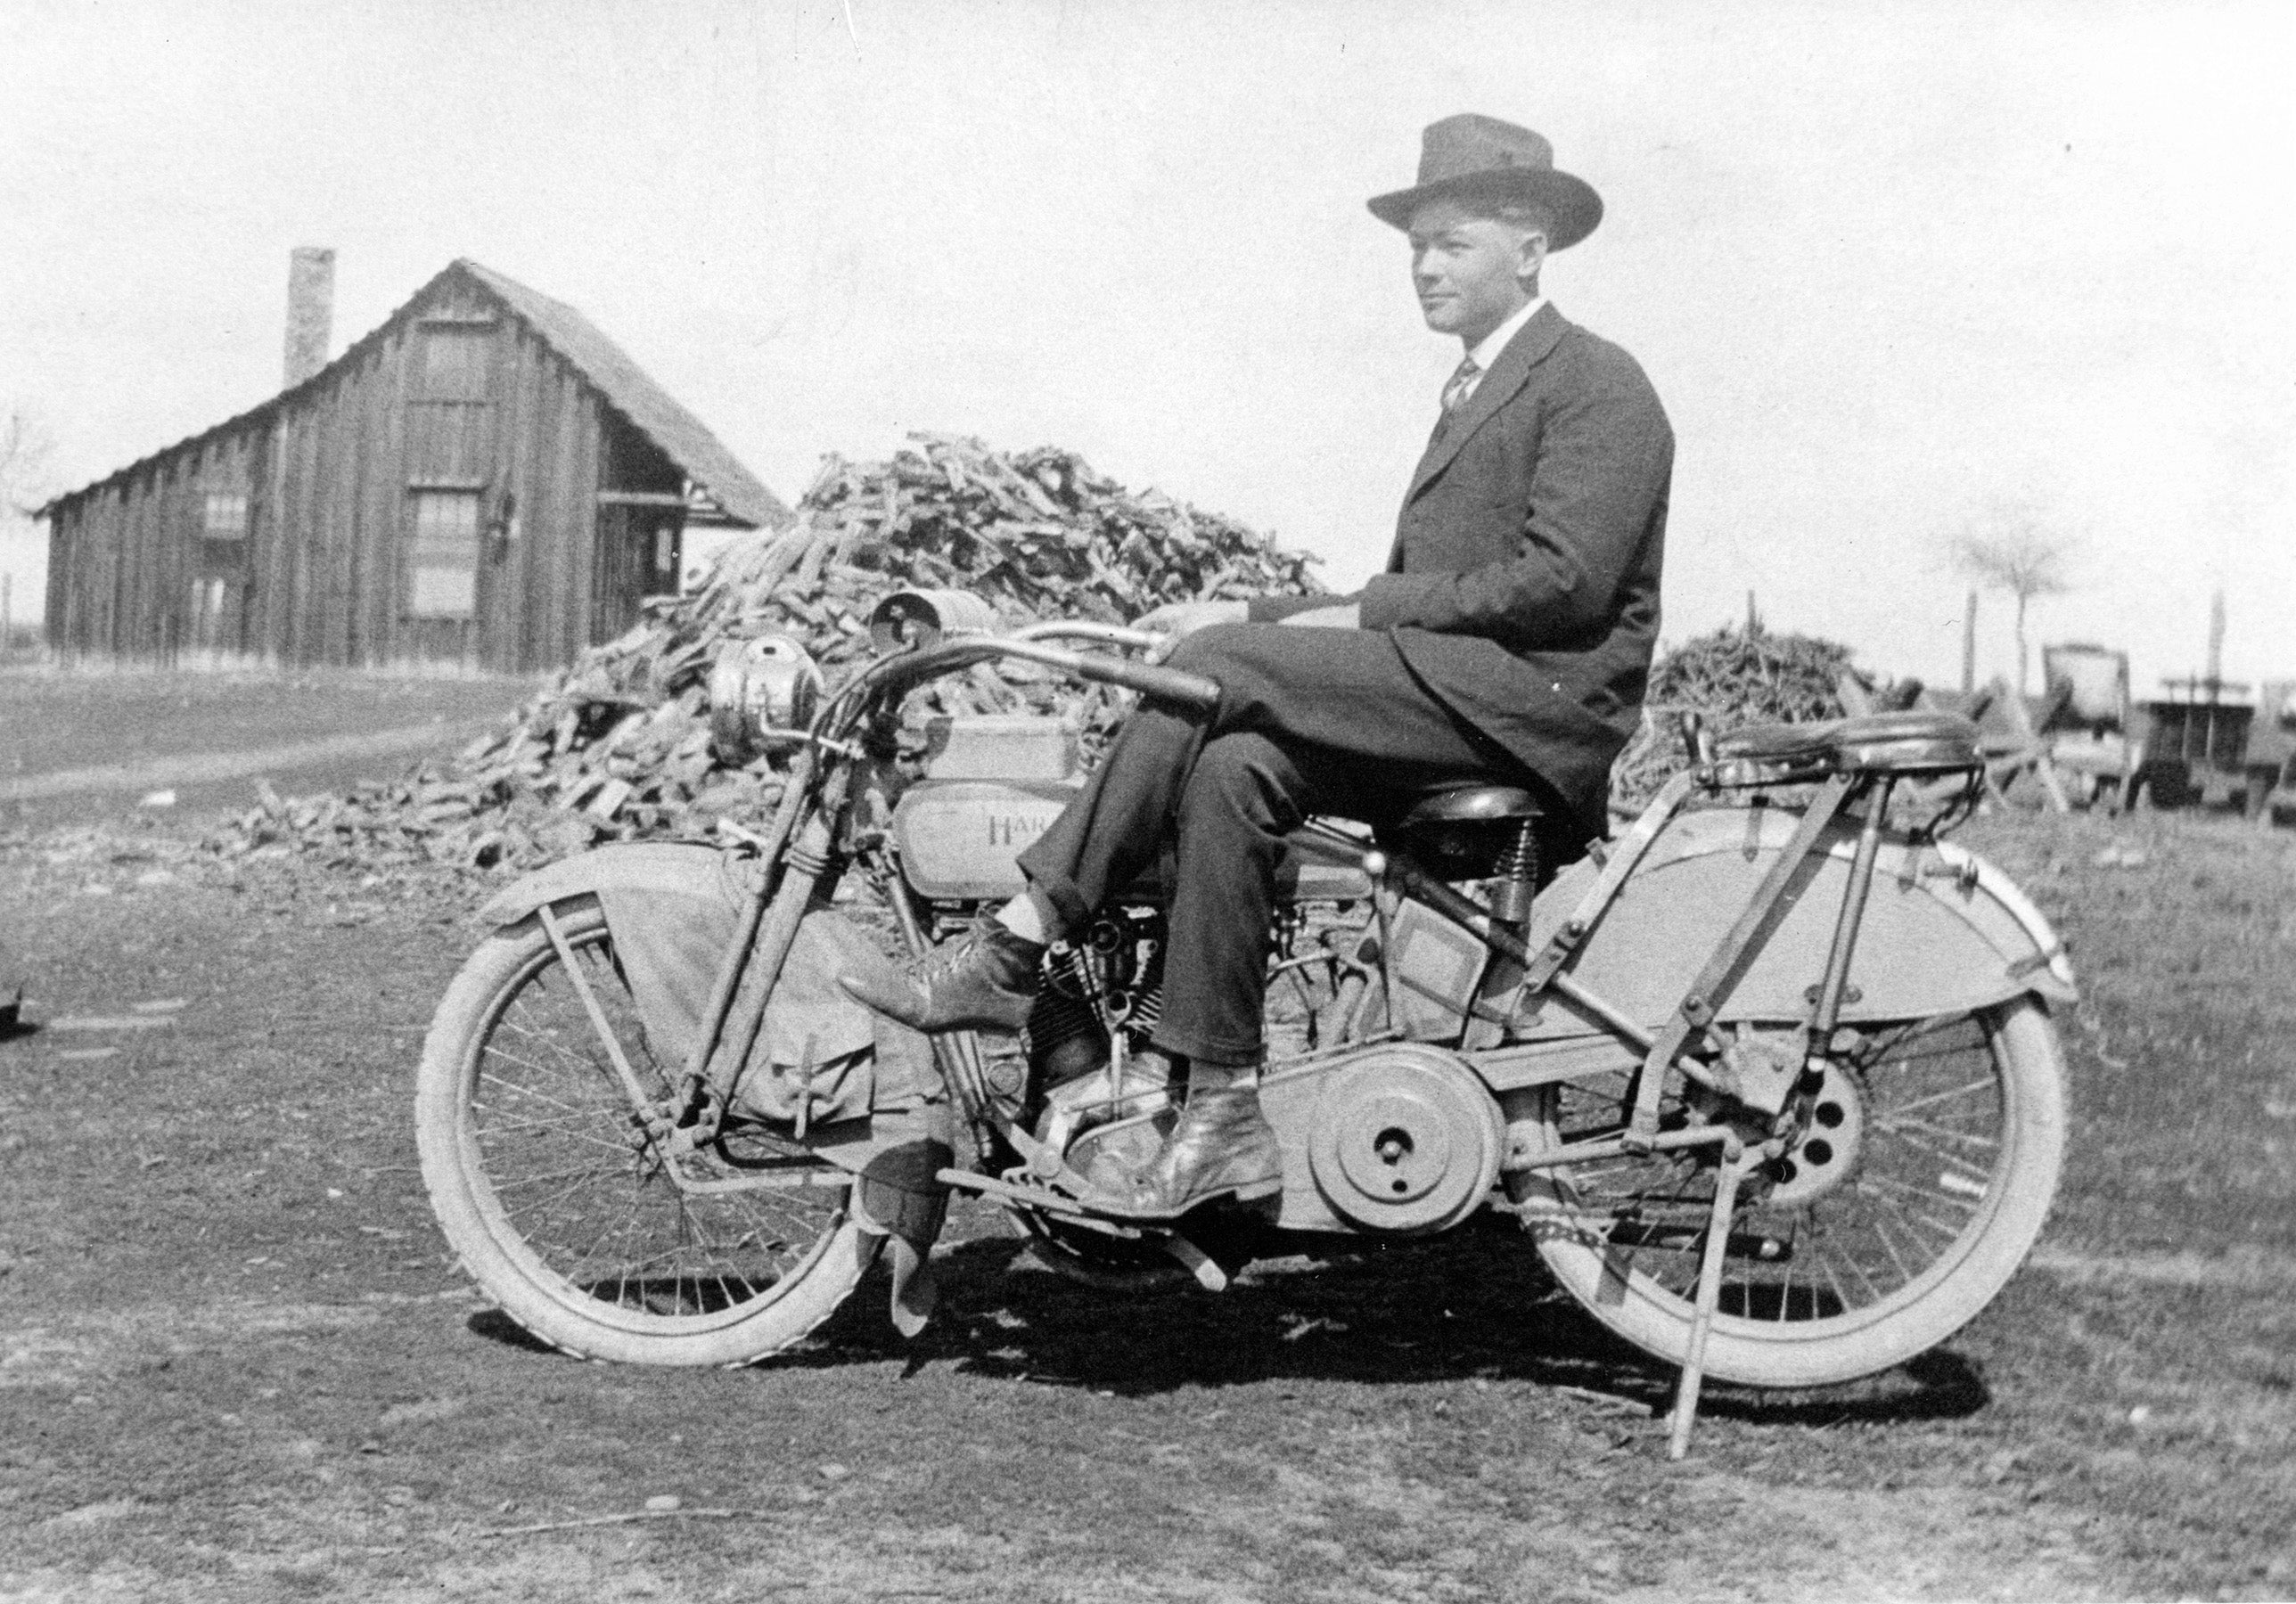 Antone Riebschlager on his Harley Davidson motorcycle in Clovis at Fran and Theresia Meisetschlagers farm on the southside of Shaw, circa 1915. Courtesy Judy Wathen-Farris